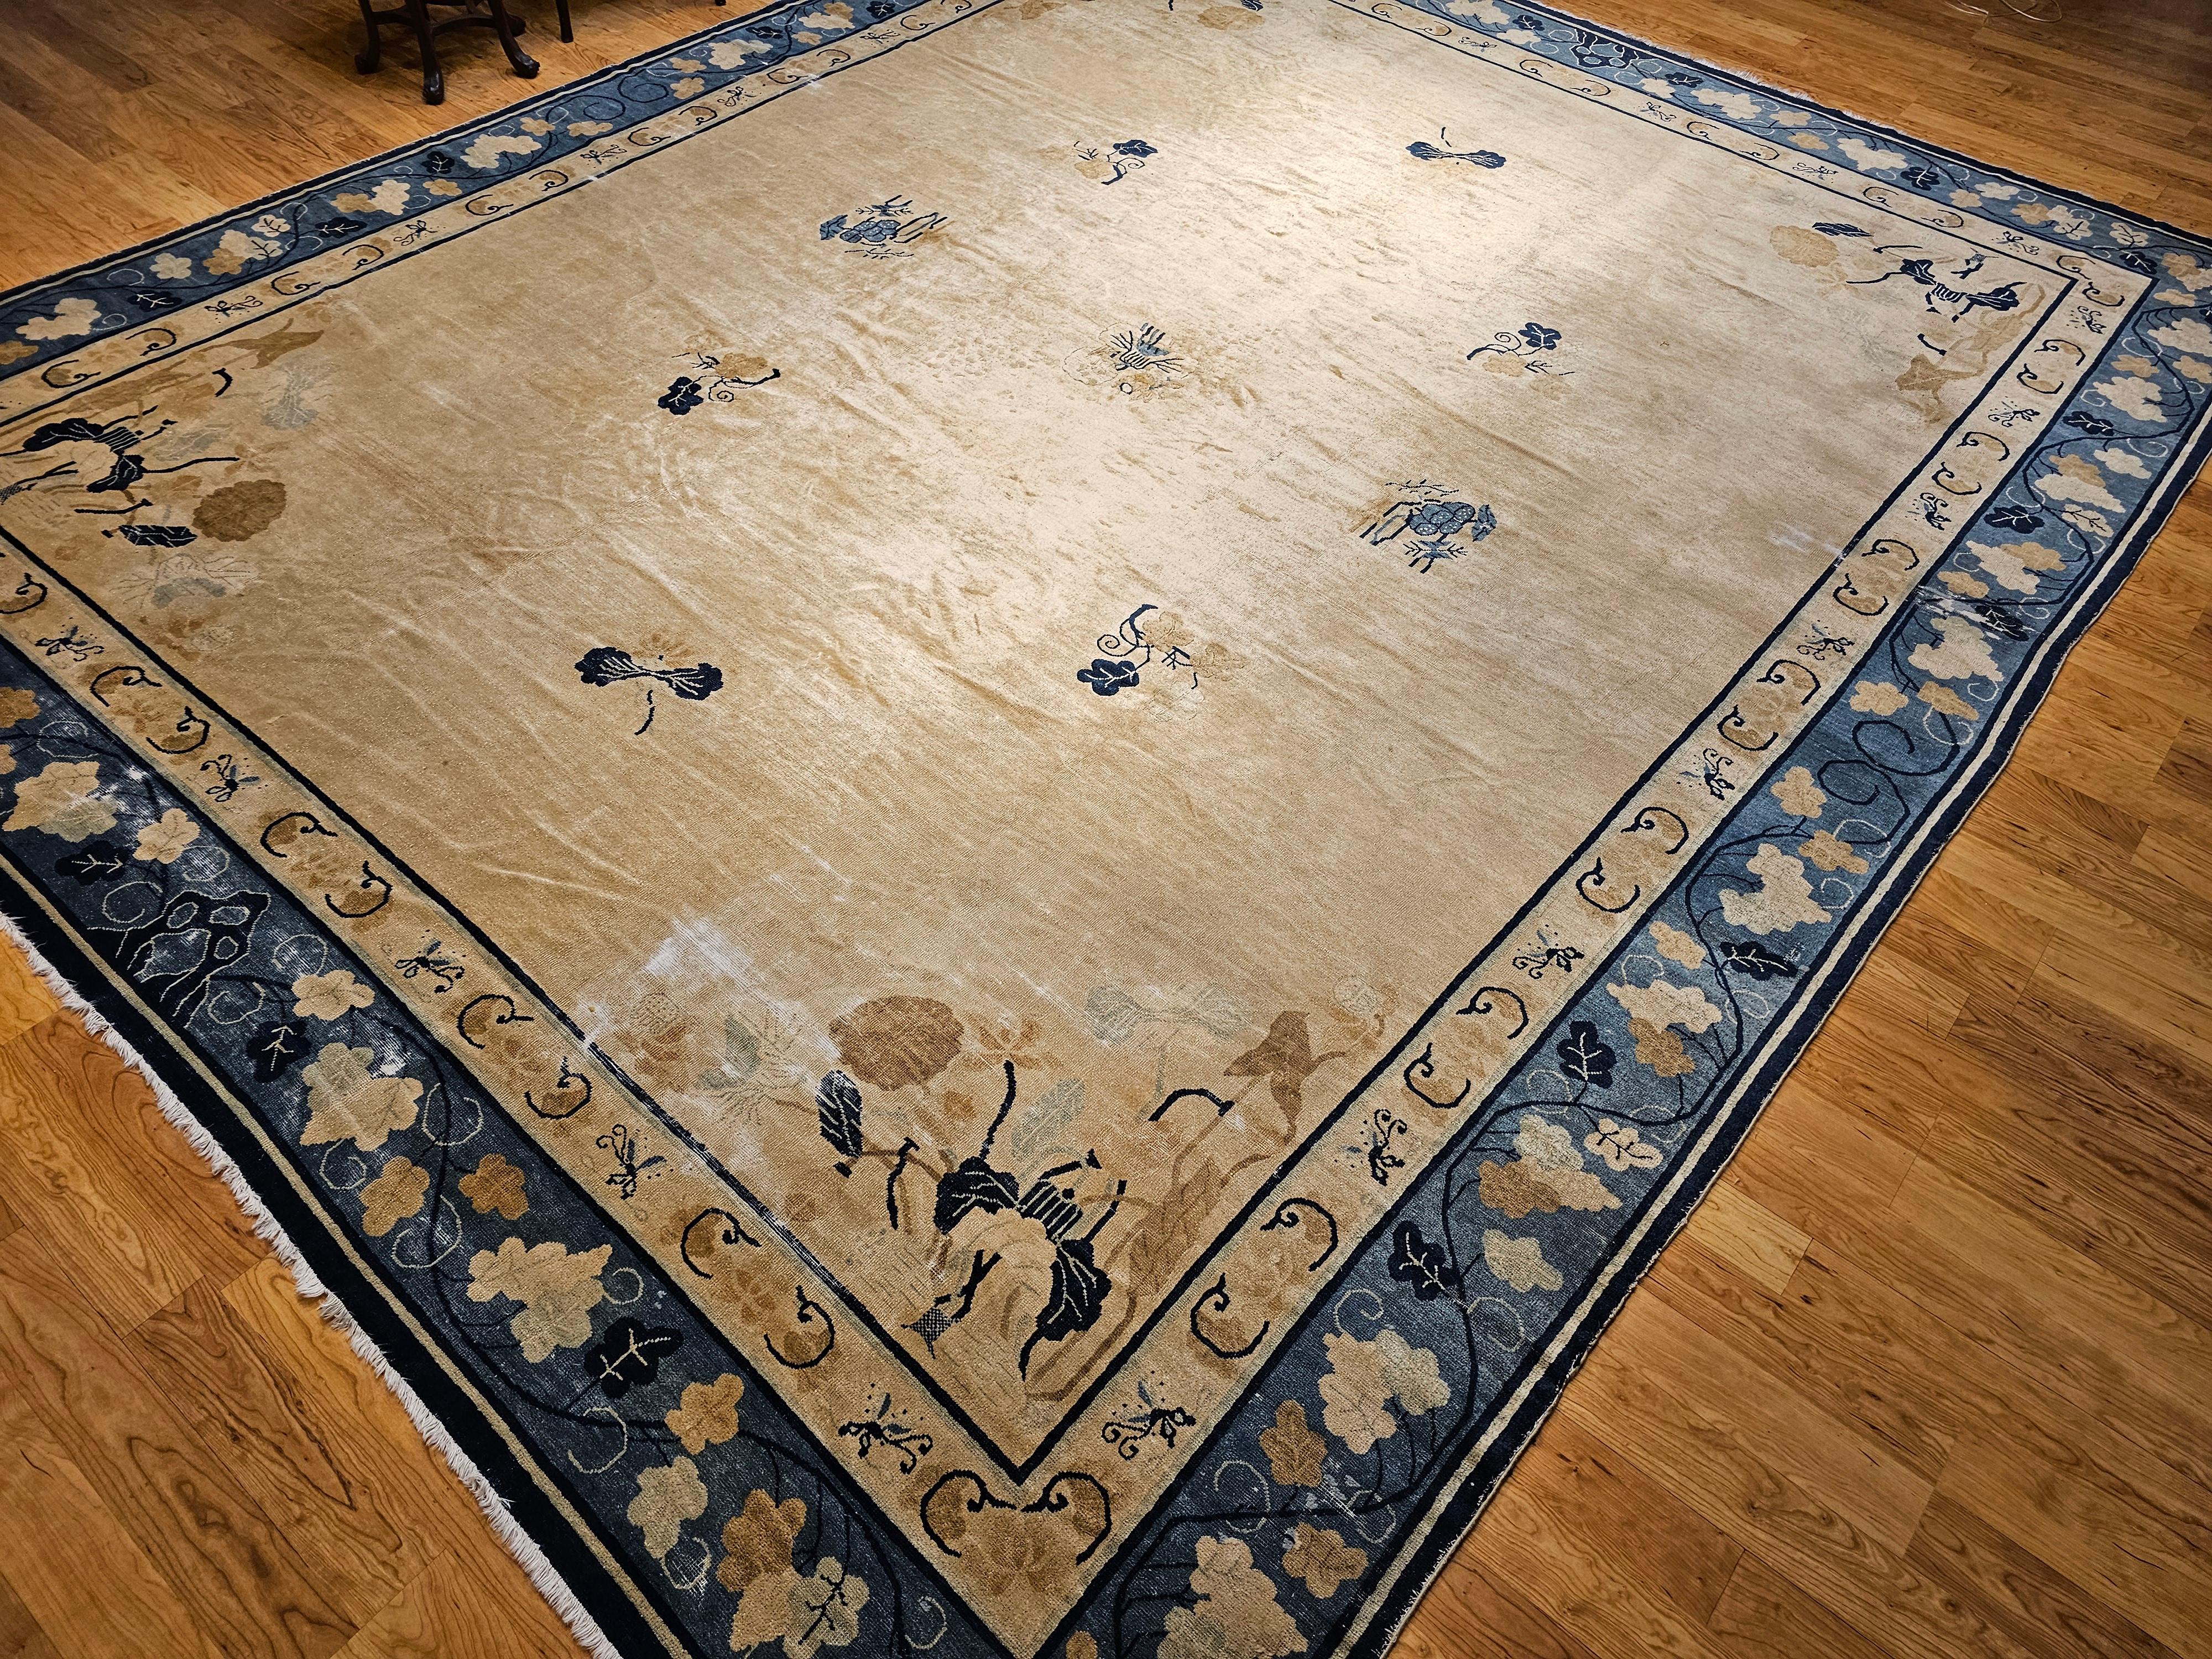 19th Century Oversized Chinese Peking Rug in Wheat, Navy, Brown, Green, Sky-Blue For Sale 10